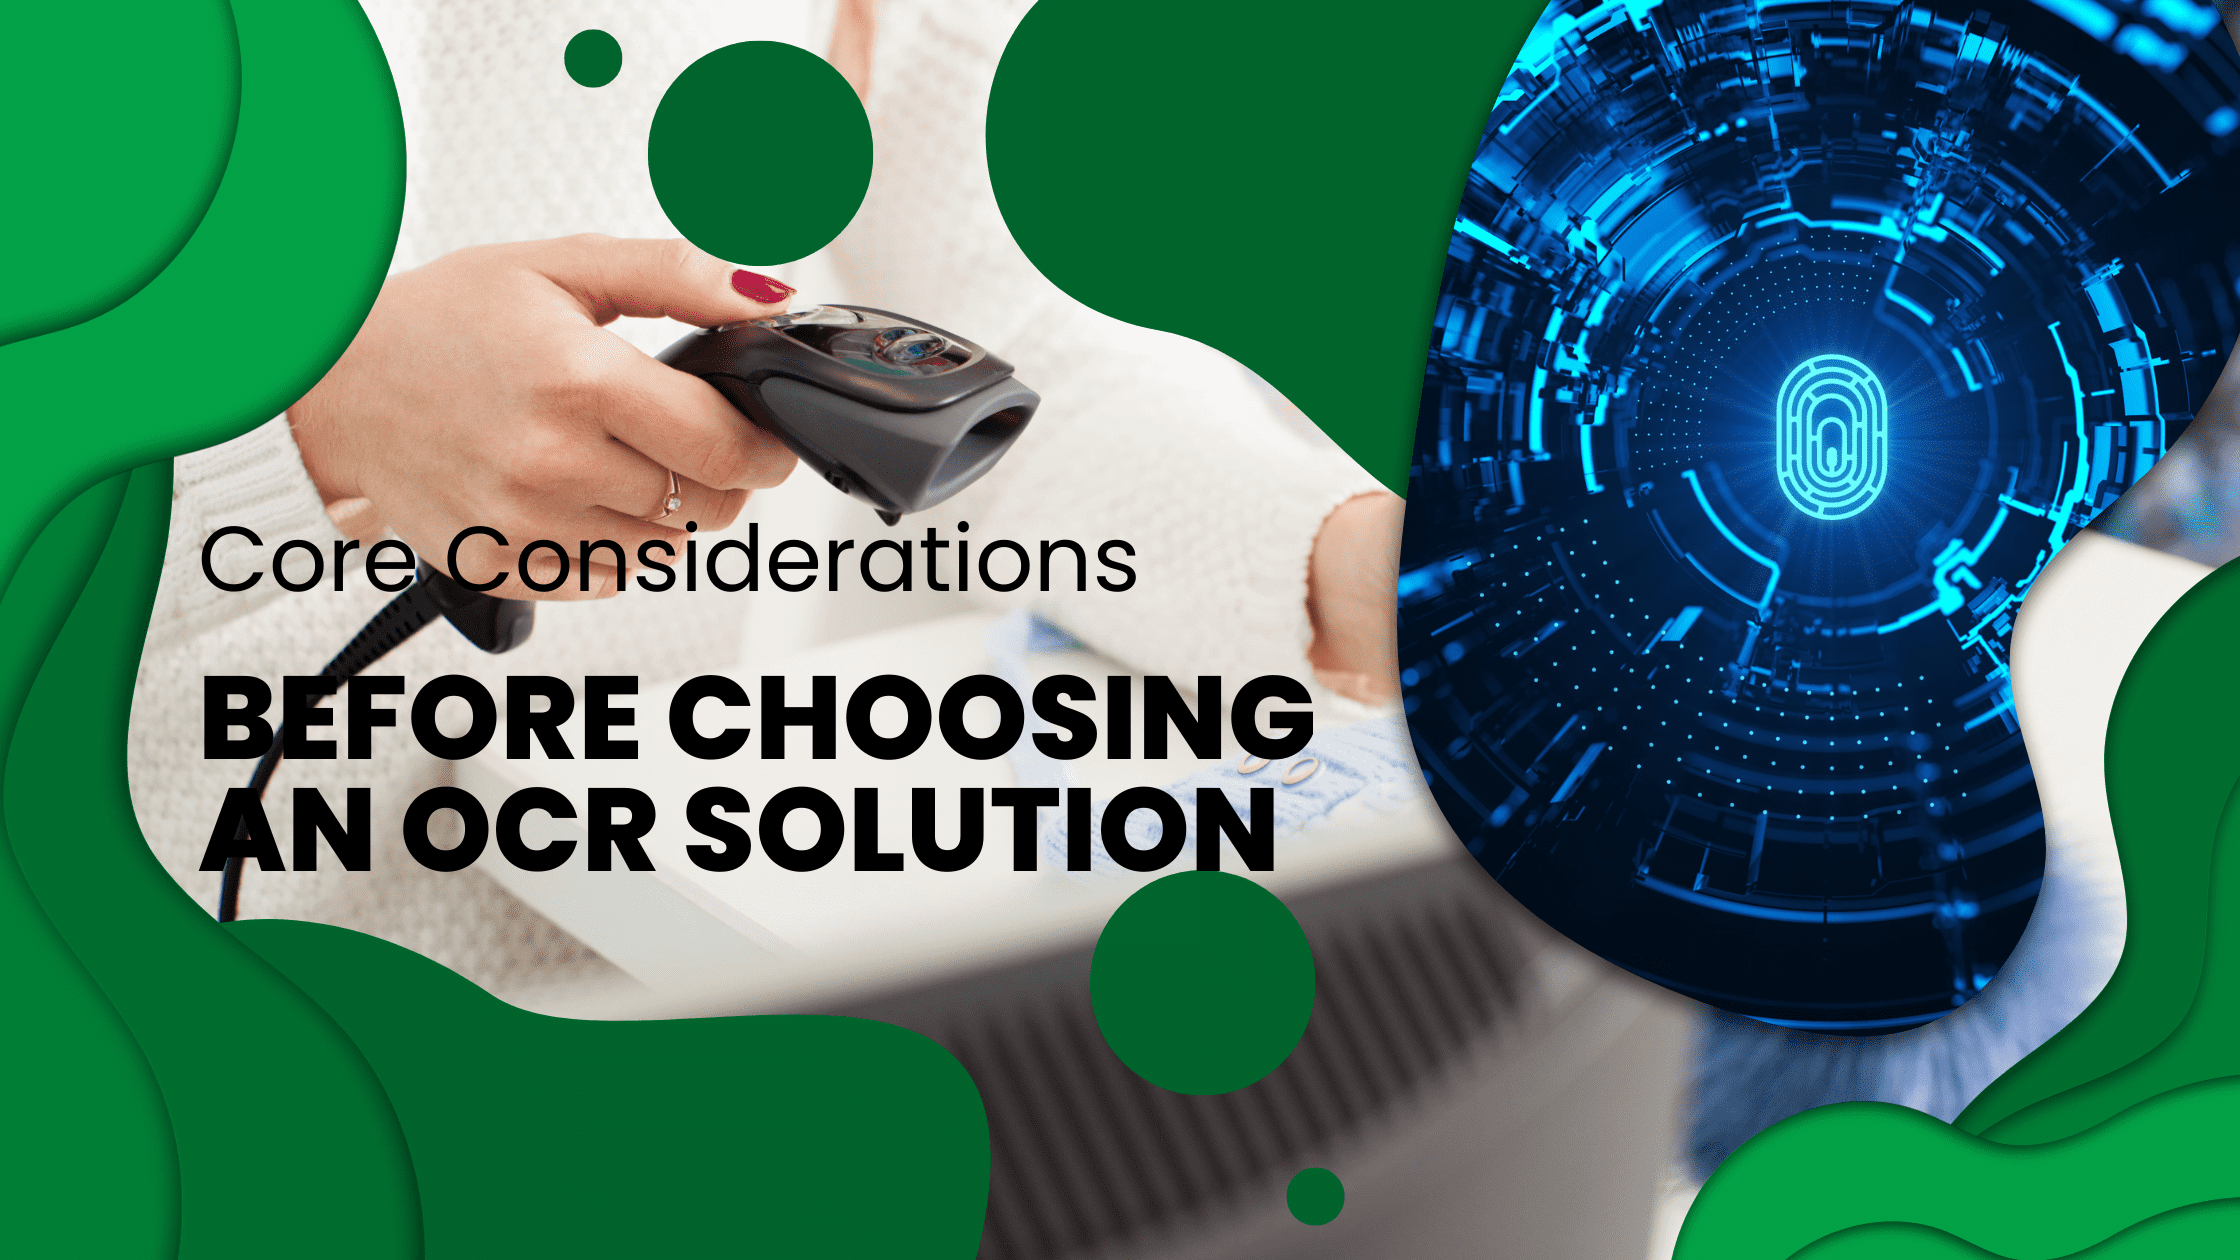 Core Considerations Before Choosing An OCR Solution